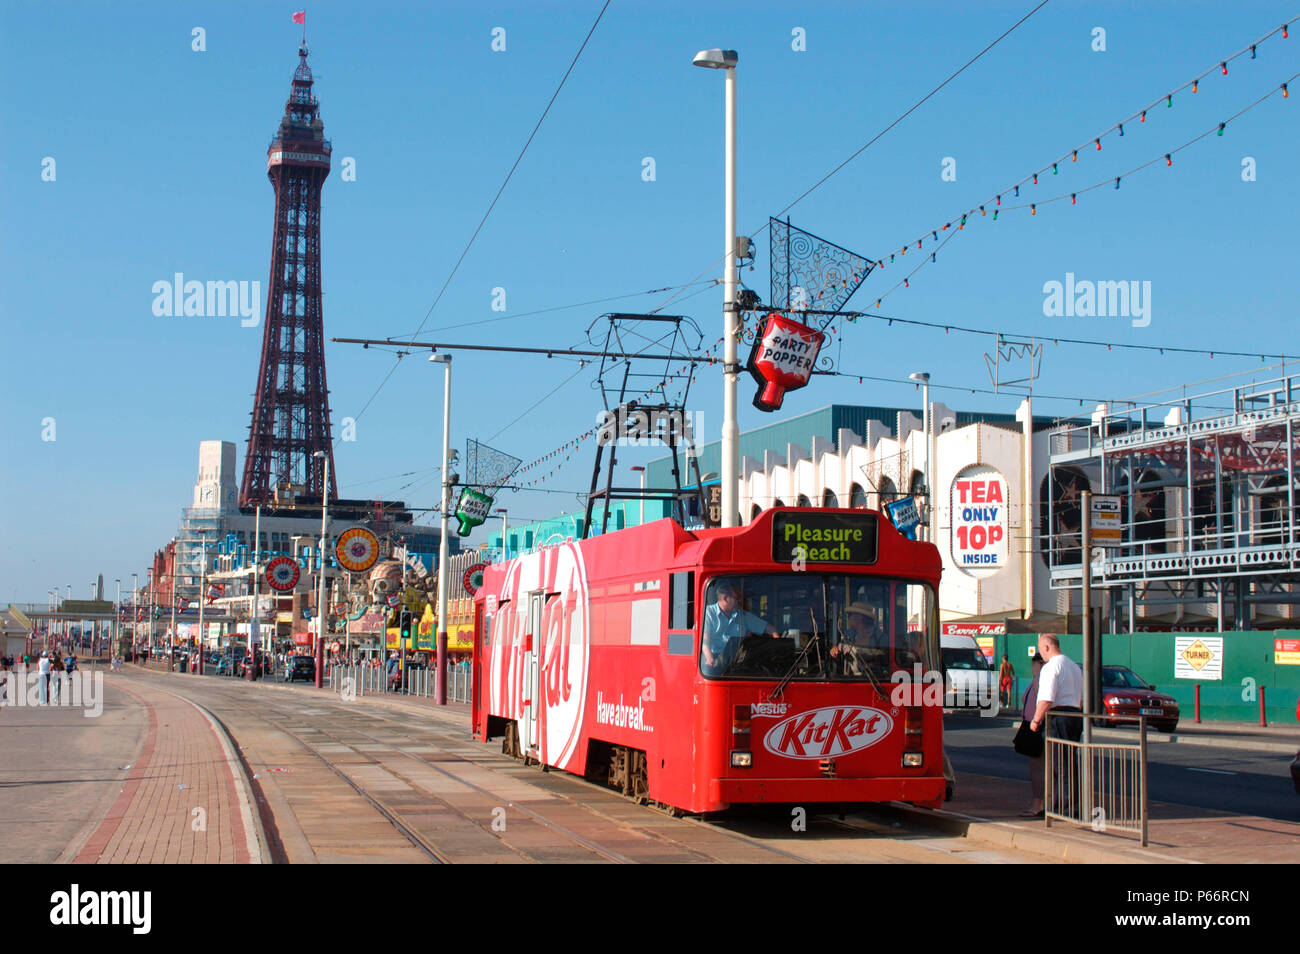 One of Blackpool's famous heritage trams, complete with advertising for a chocolate confectionary, traverses the promenade with Blackpool Tower in the Stock Photo